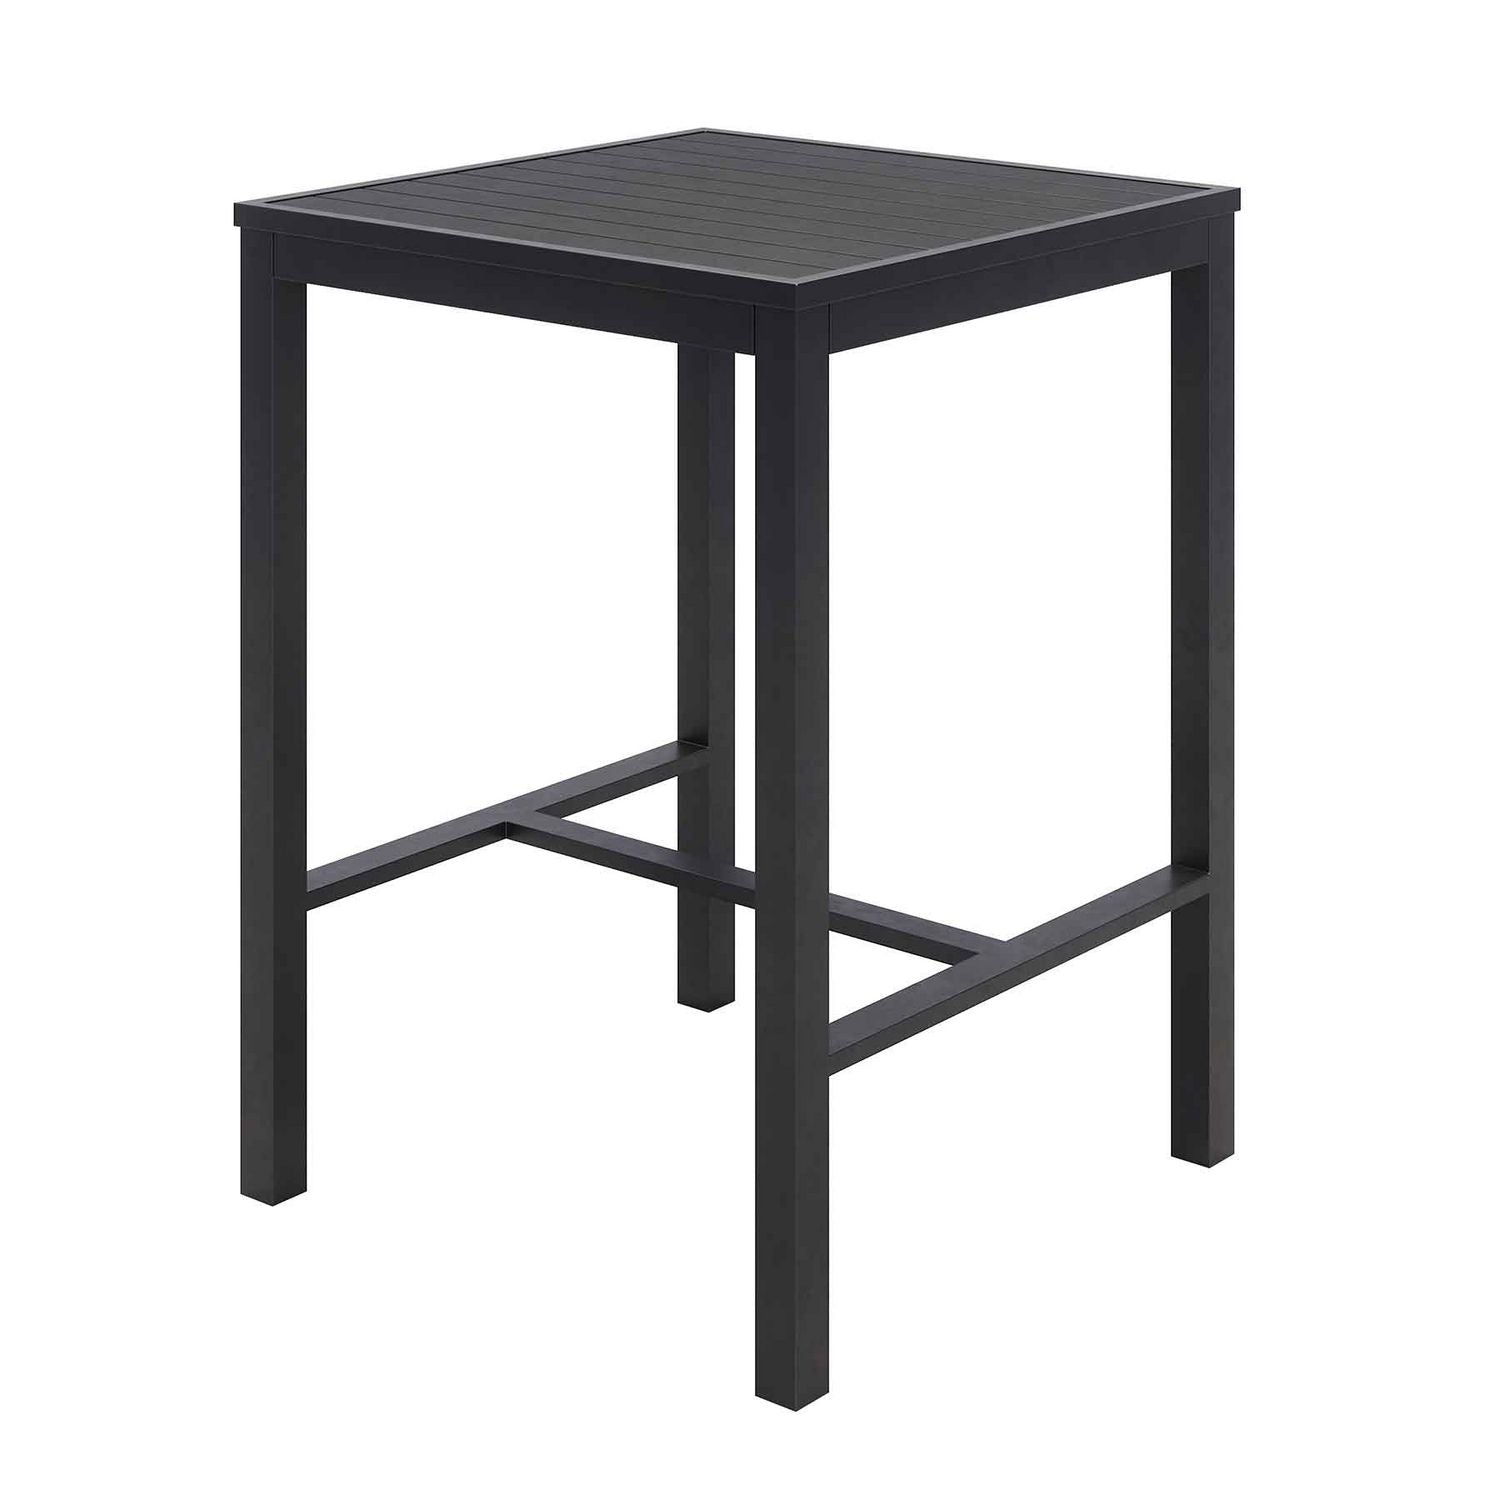 eveleen-outdoor-bistro-patio-table-with-two-black-powder-coated-polymer-barstools-30-square-black-ships-in-4-6-bus-days_kfi840031925275 - 2